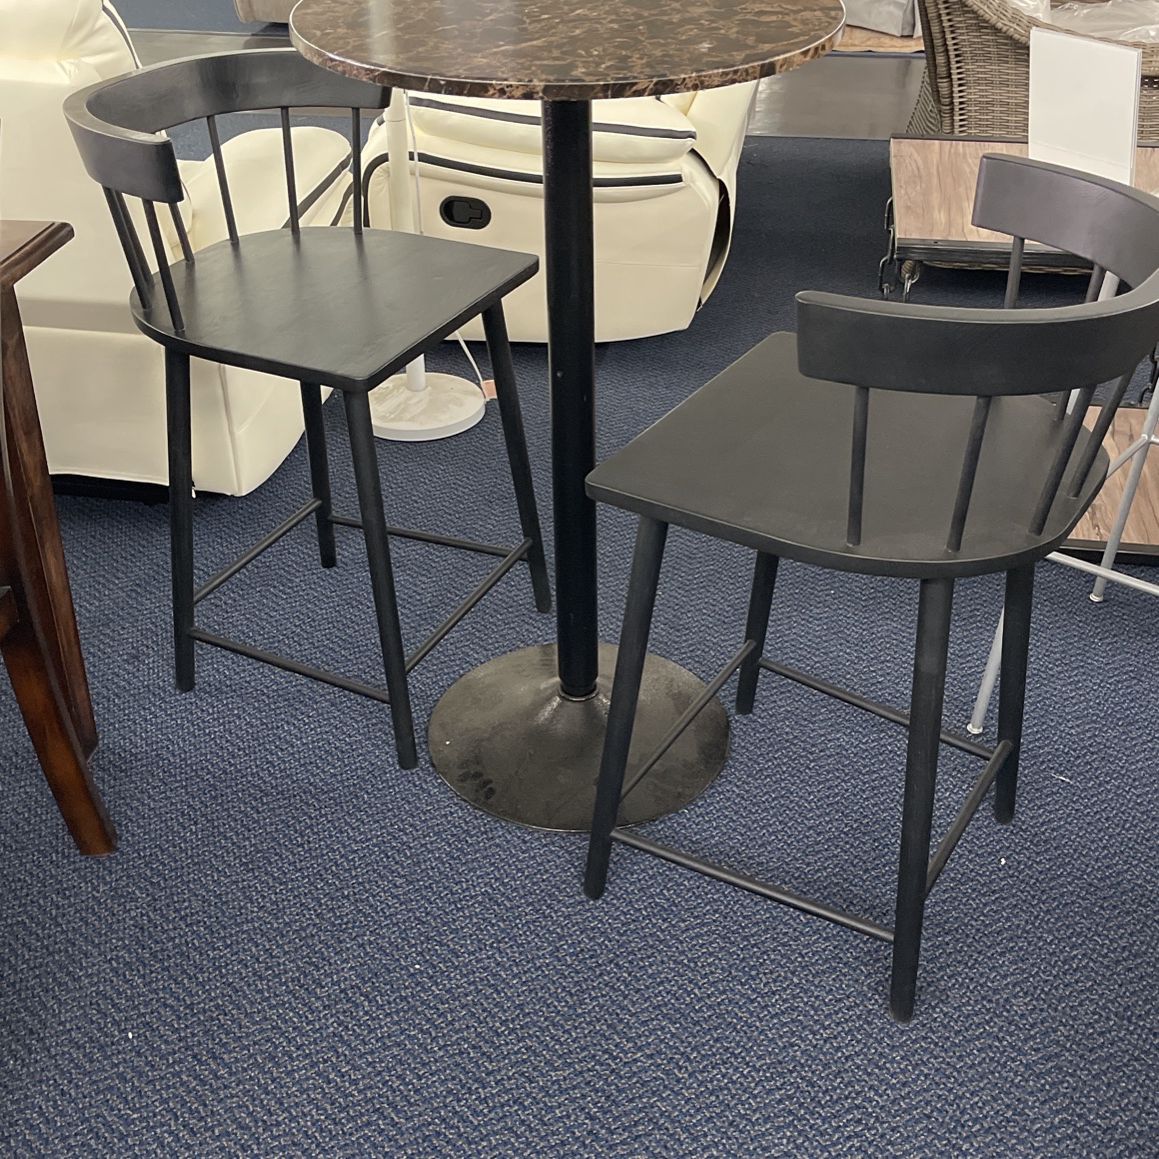 Bar Height Round Table W/2 Counter Heights Chairs